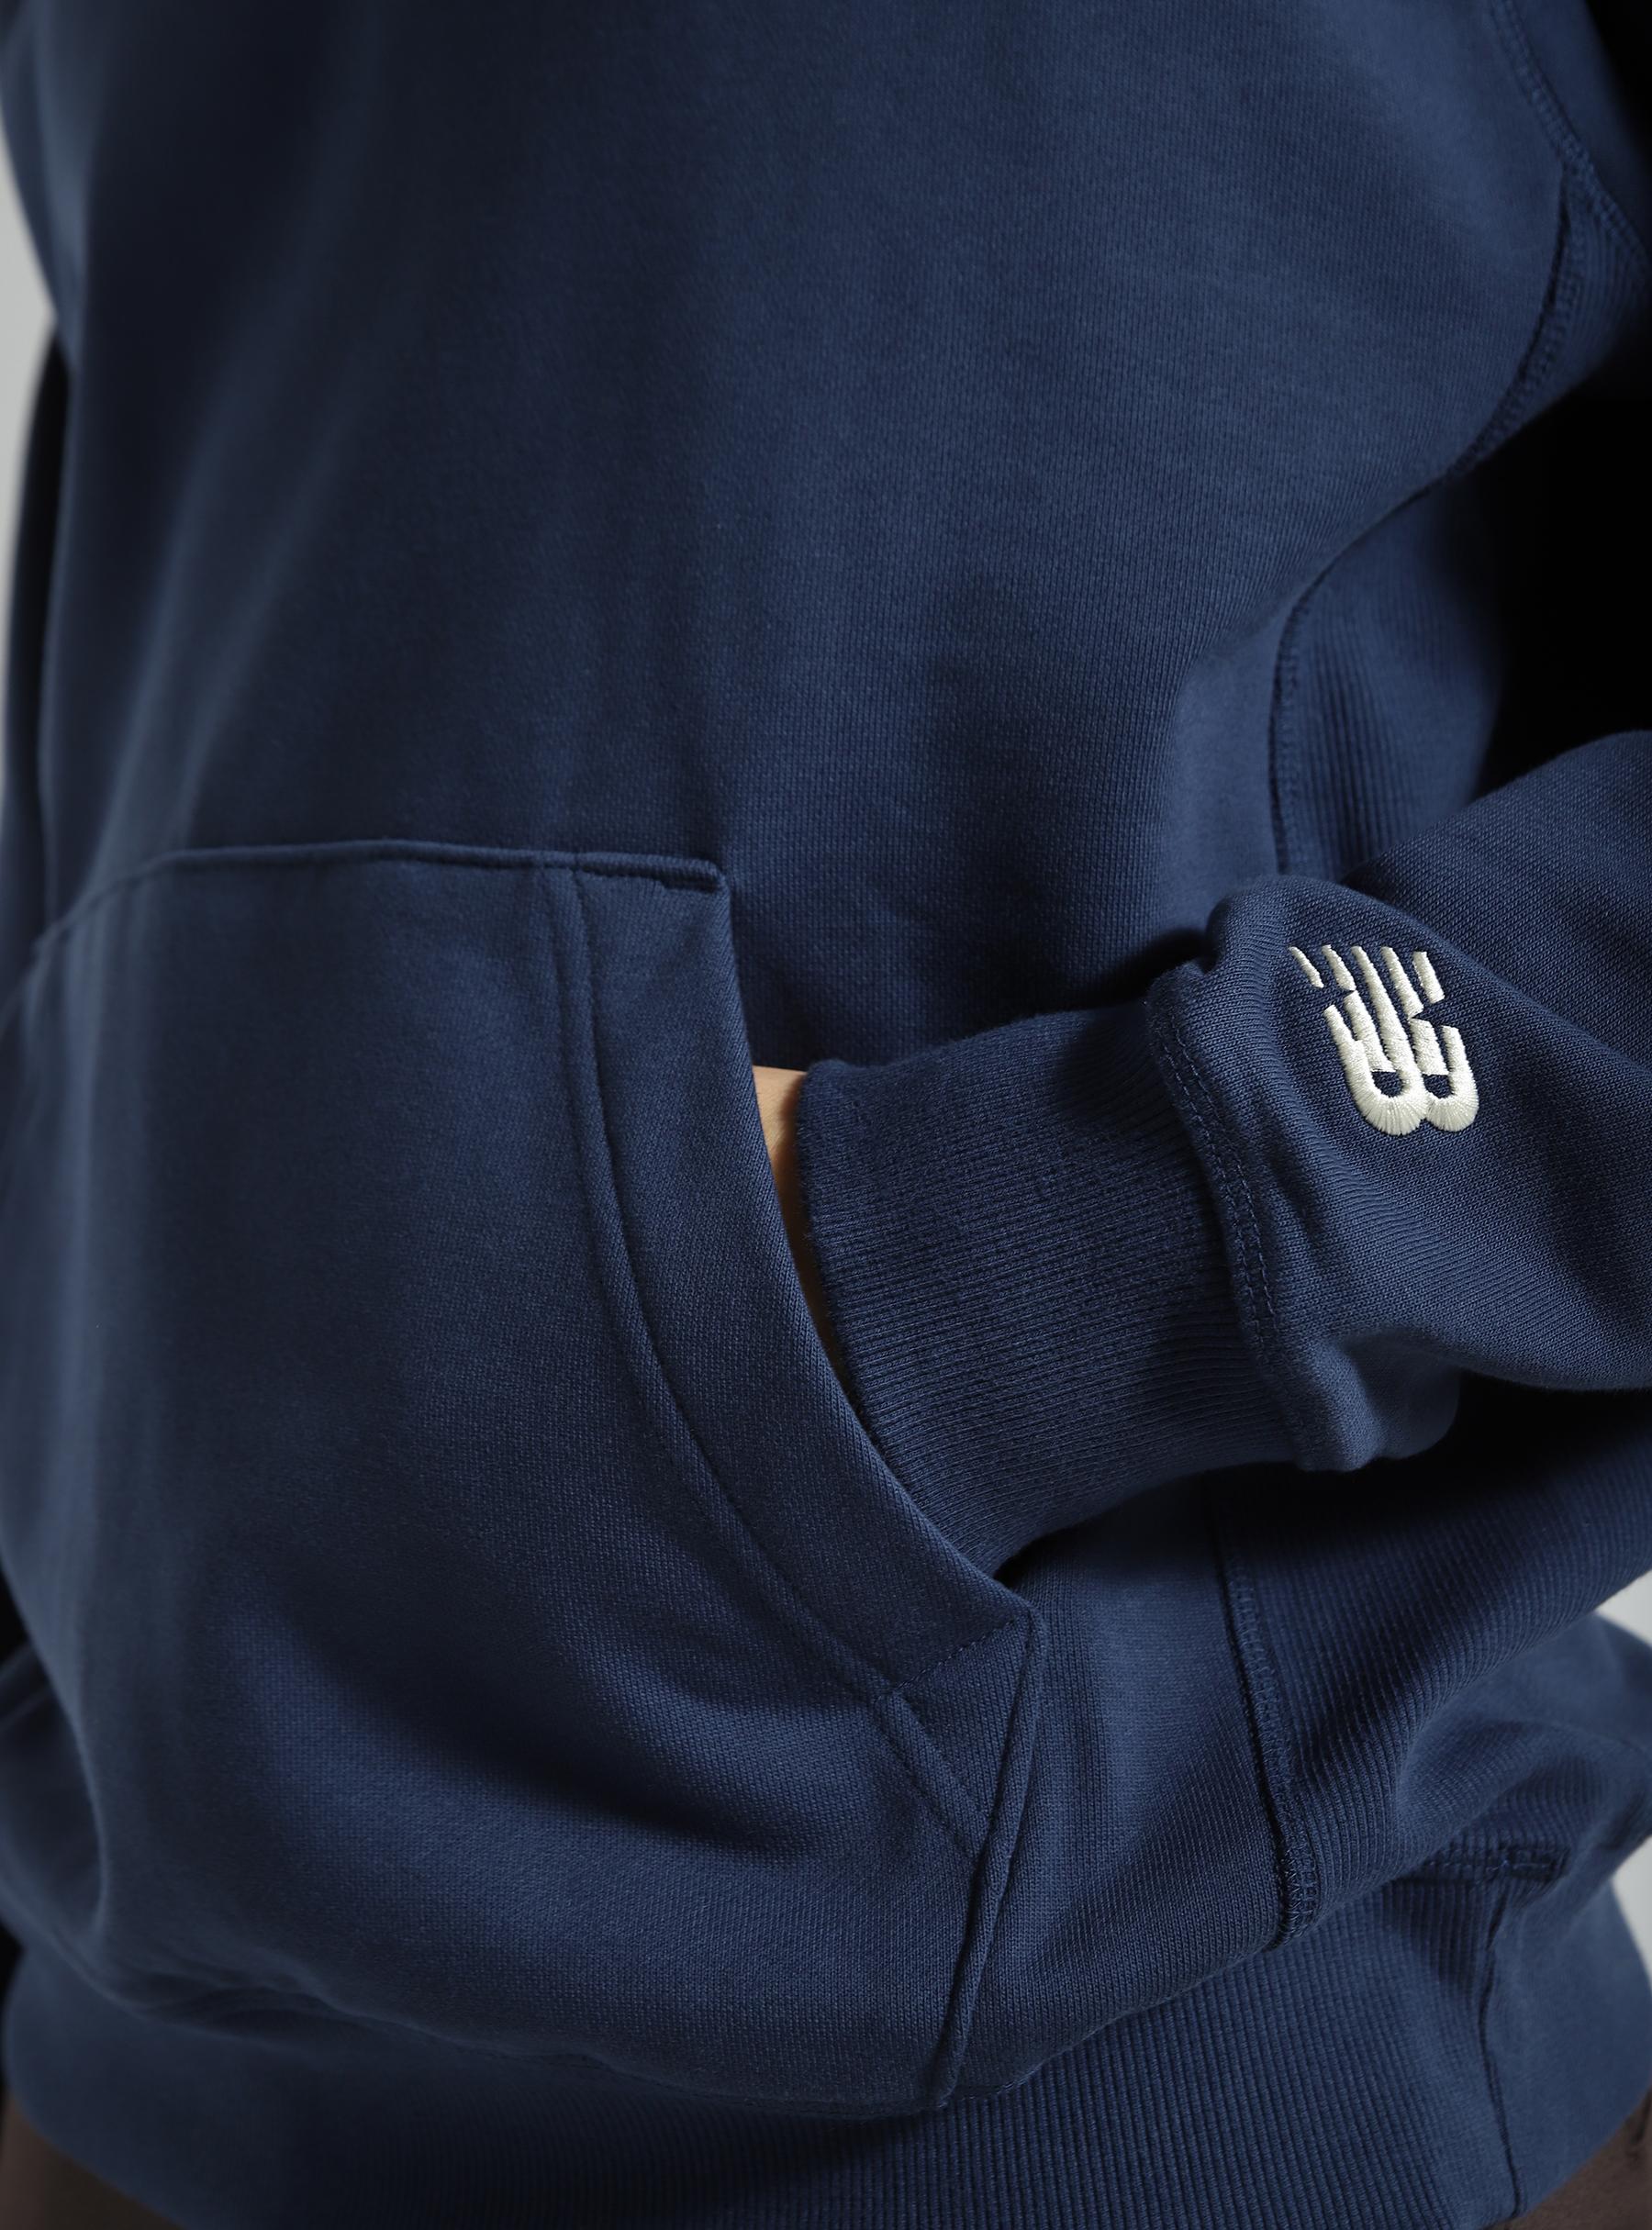 Athletics Embroidered Relaxed Hoodie NB Navy MT41539-NNY